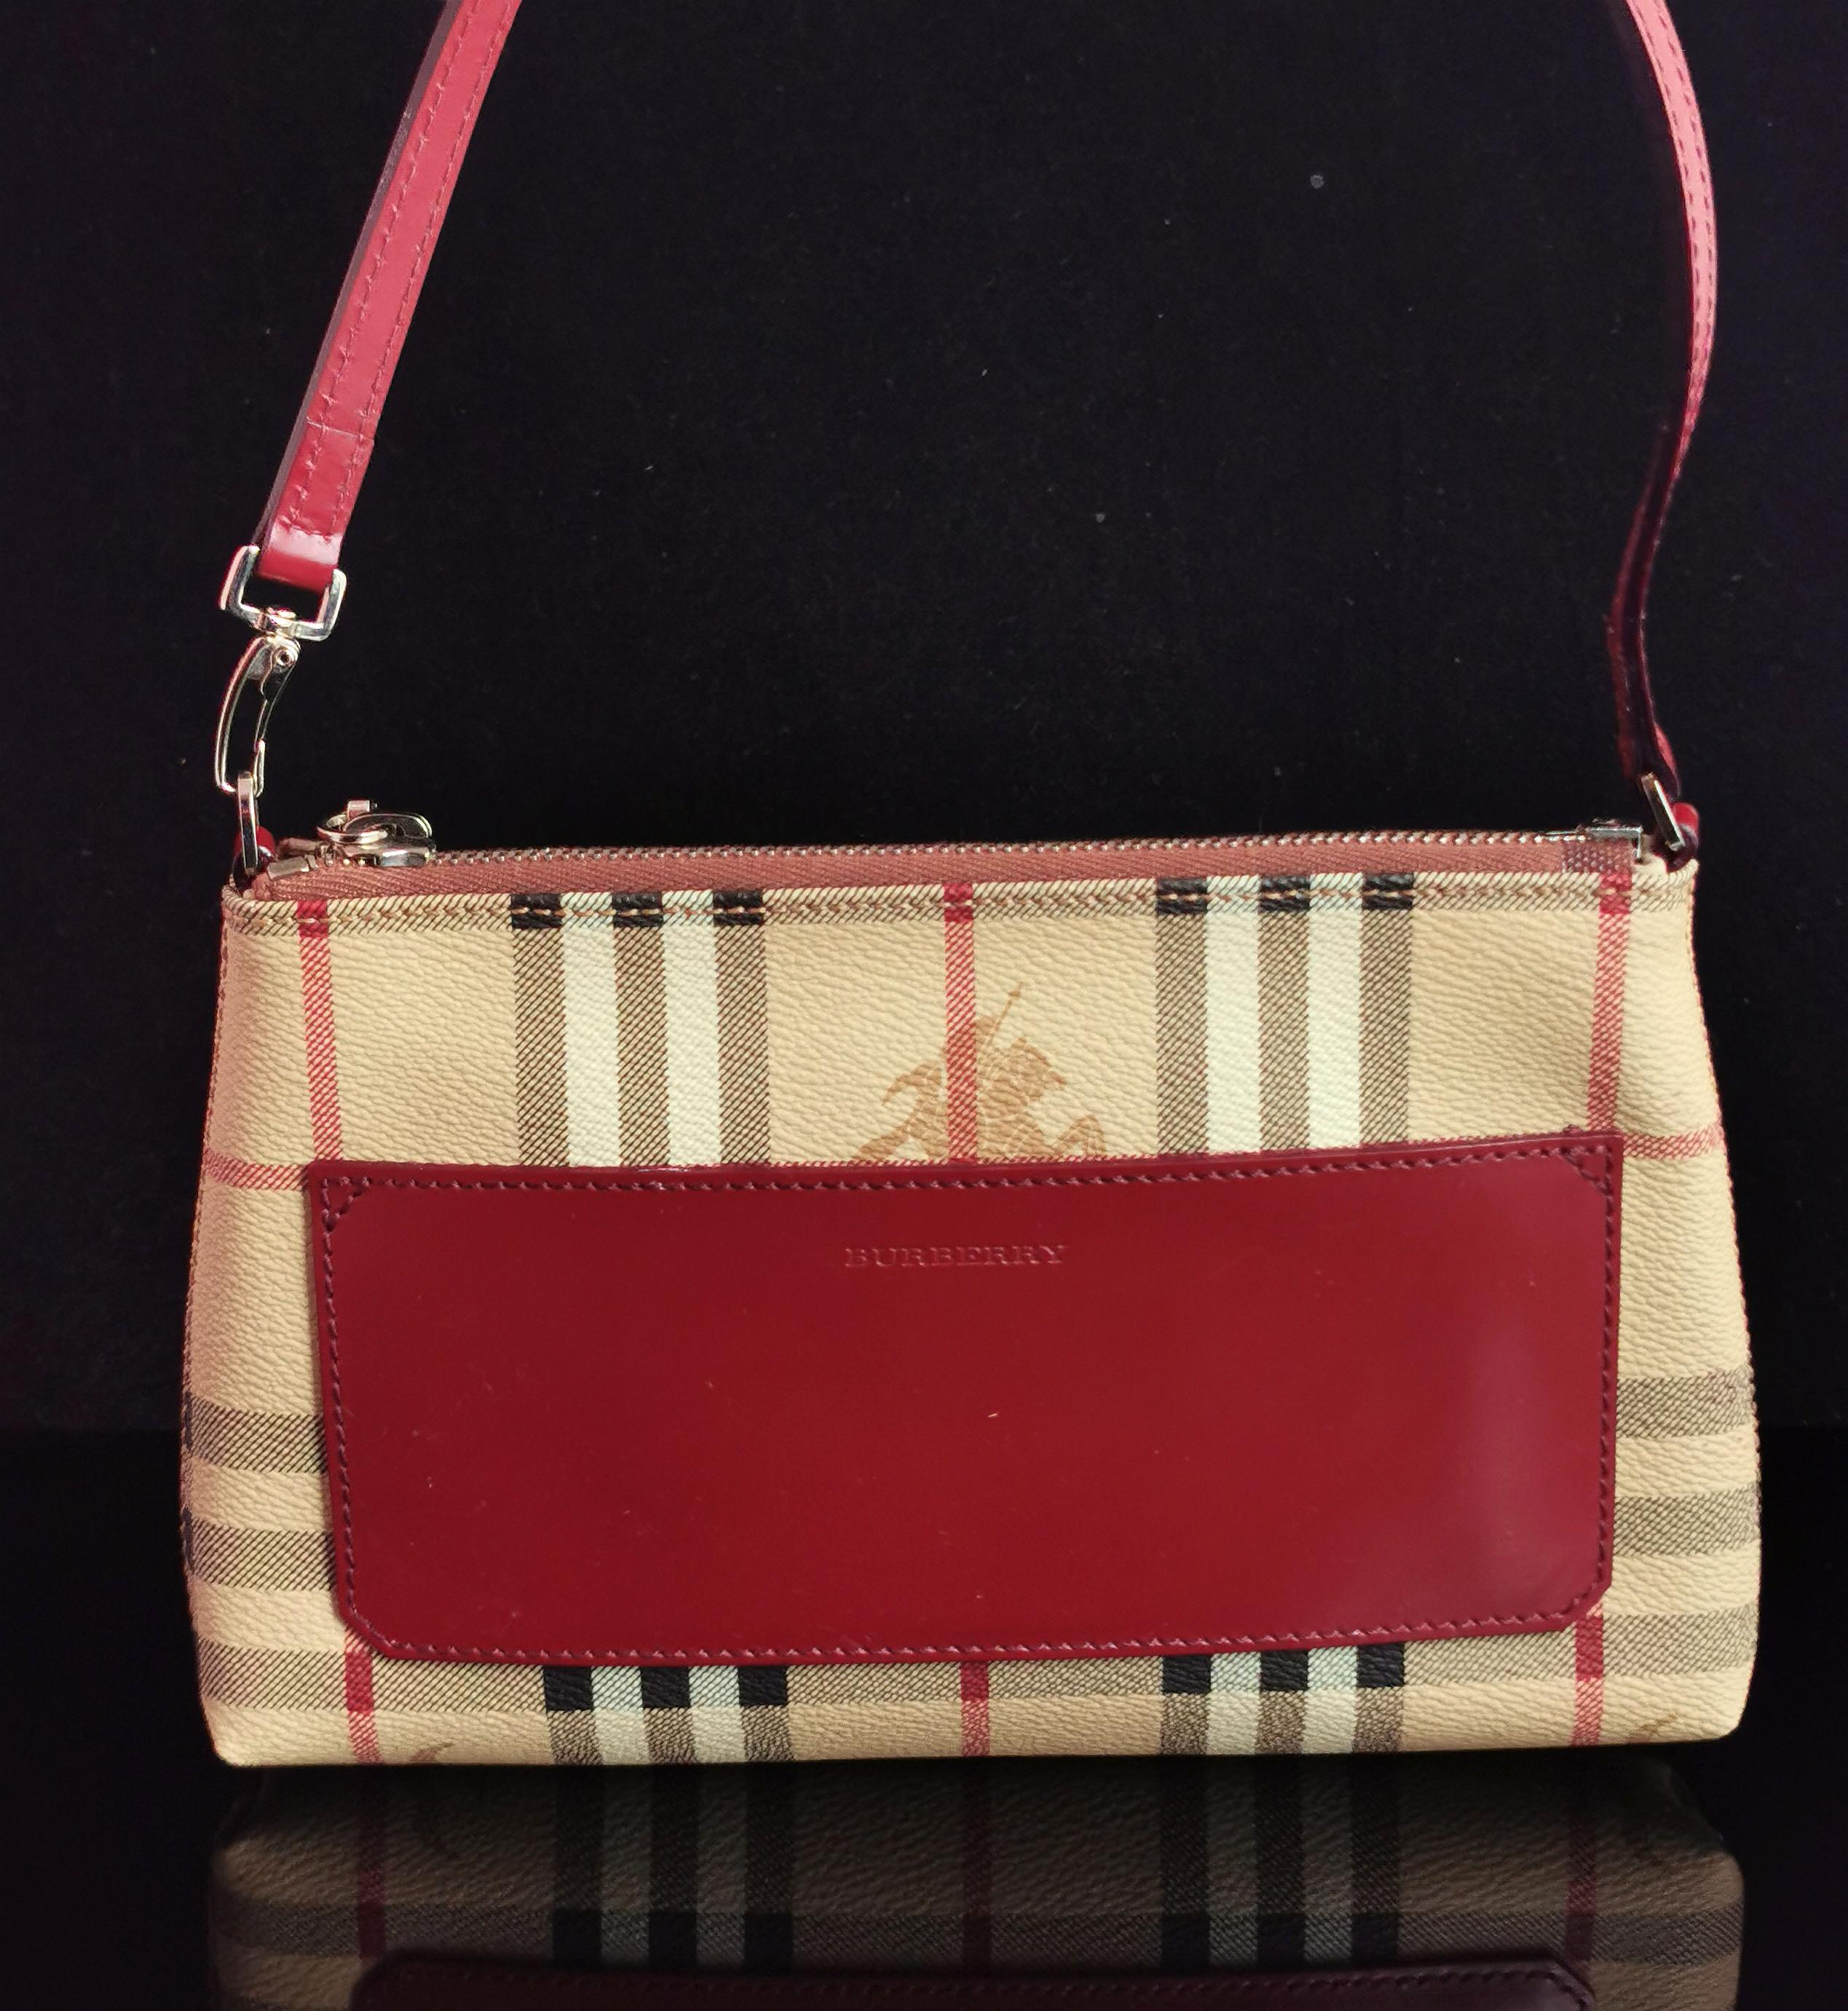 A stylish vintage Burberry pochette top handle or shoulder bag.

Classic Nova check in a coated and textured canvas with an oxblood red leather front, branded burberry.

It has a matching red leather handle and silver tone hardware including the